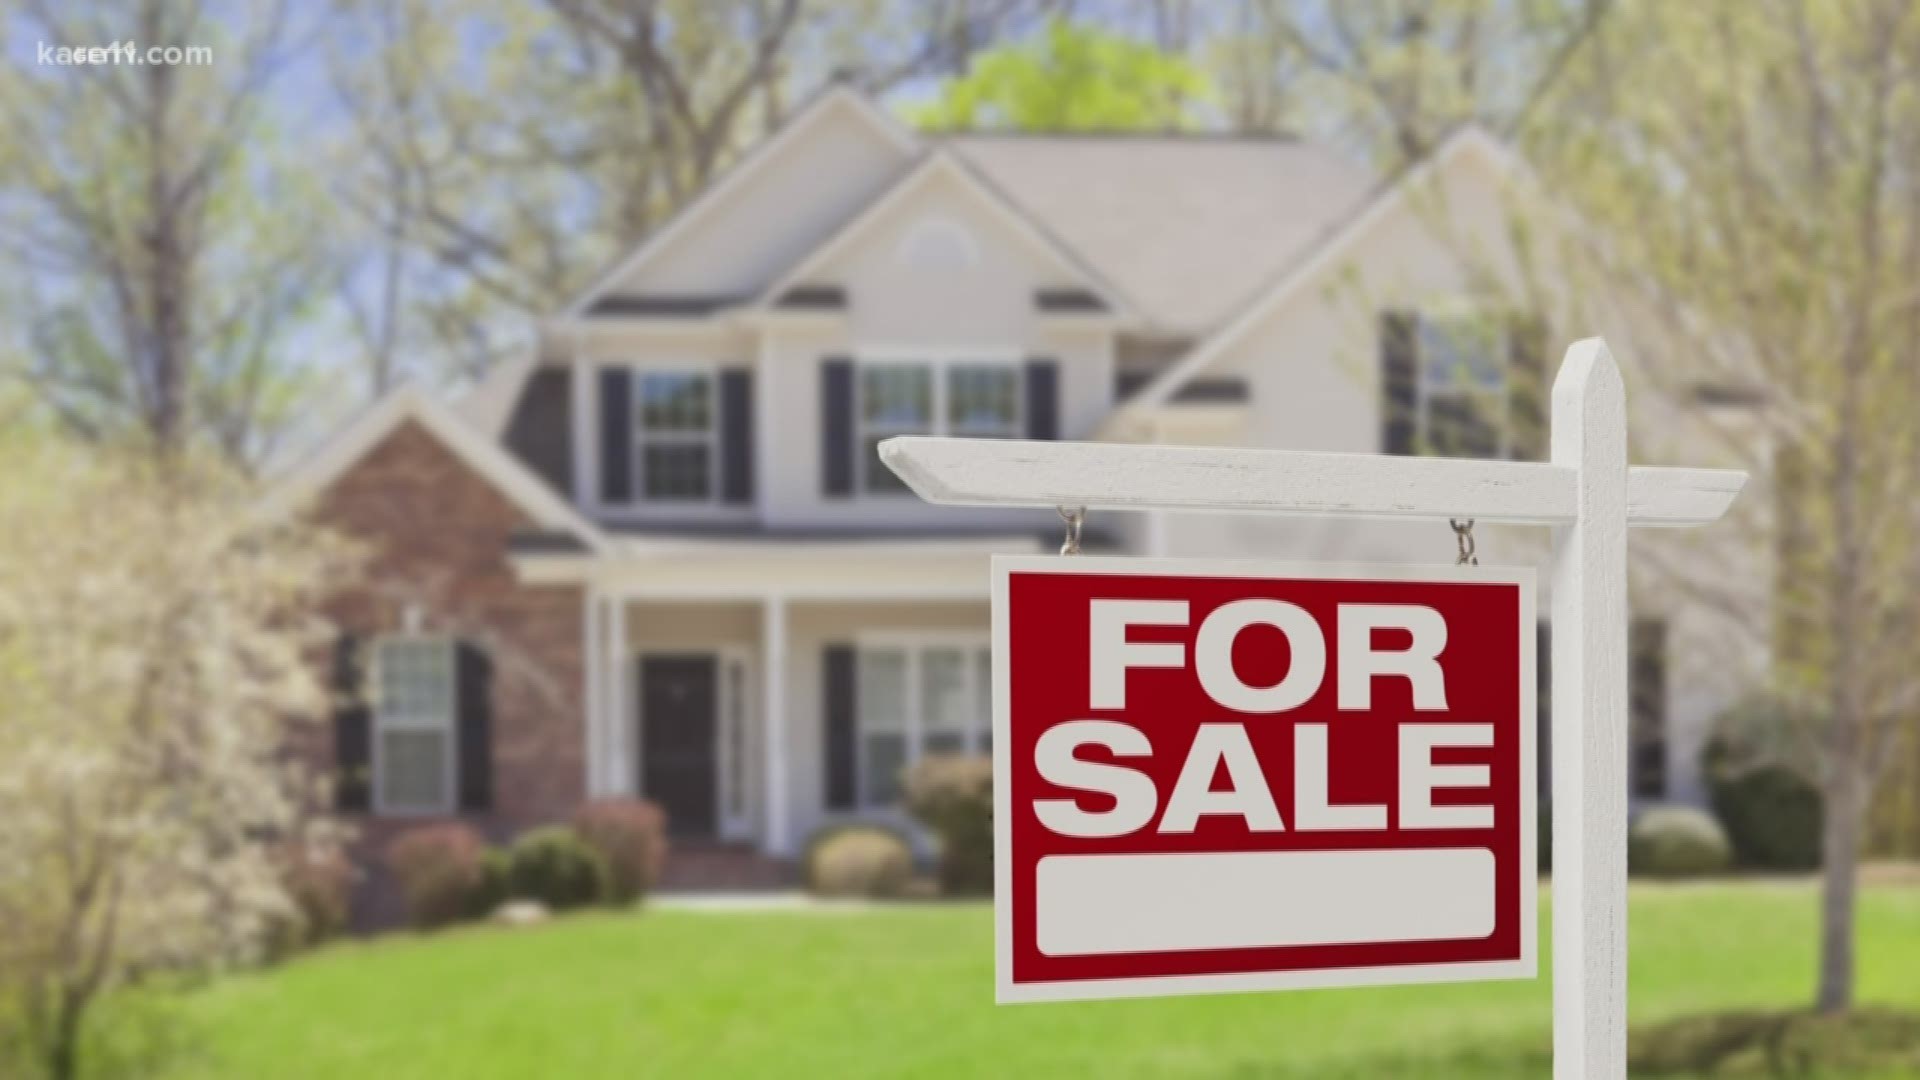 What buyers and sellers need to know about the upcoming Spring home buying season.